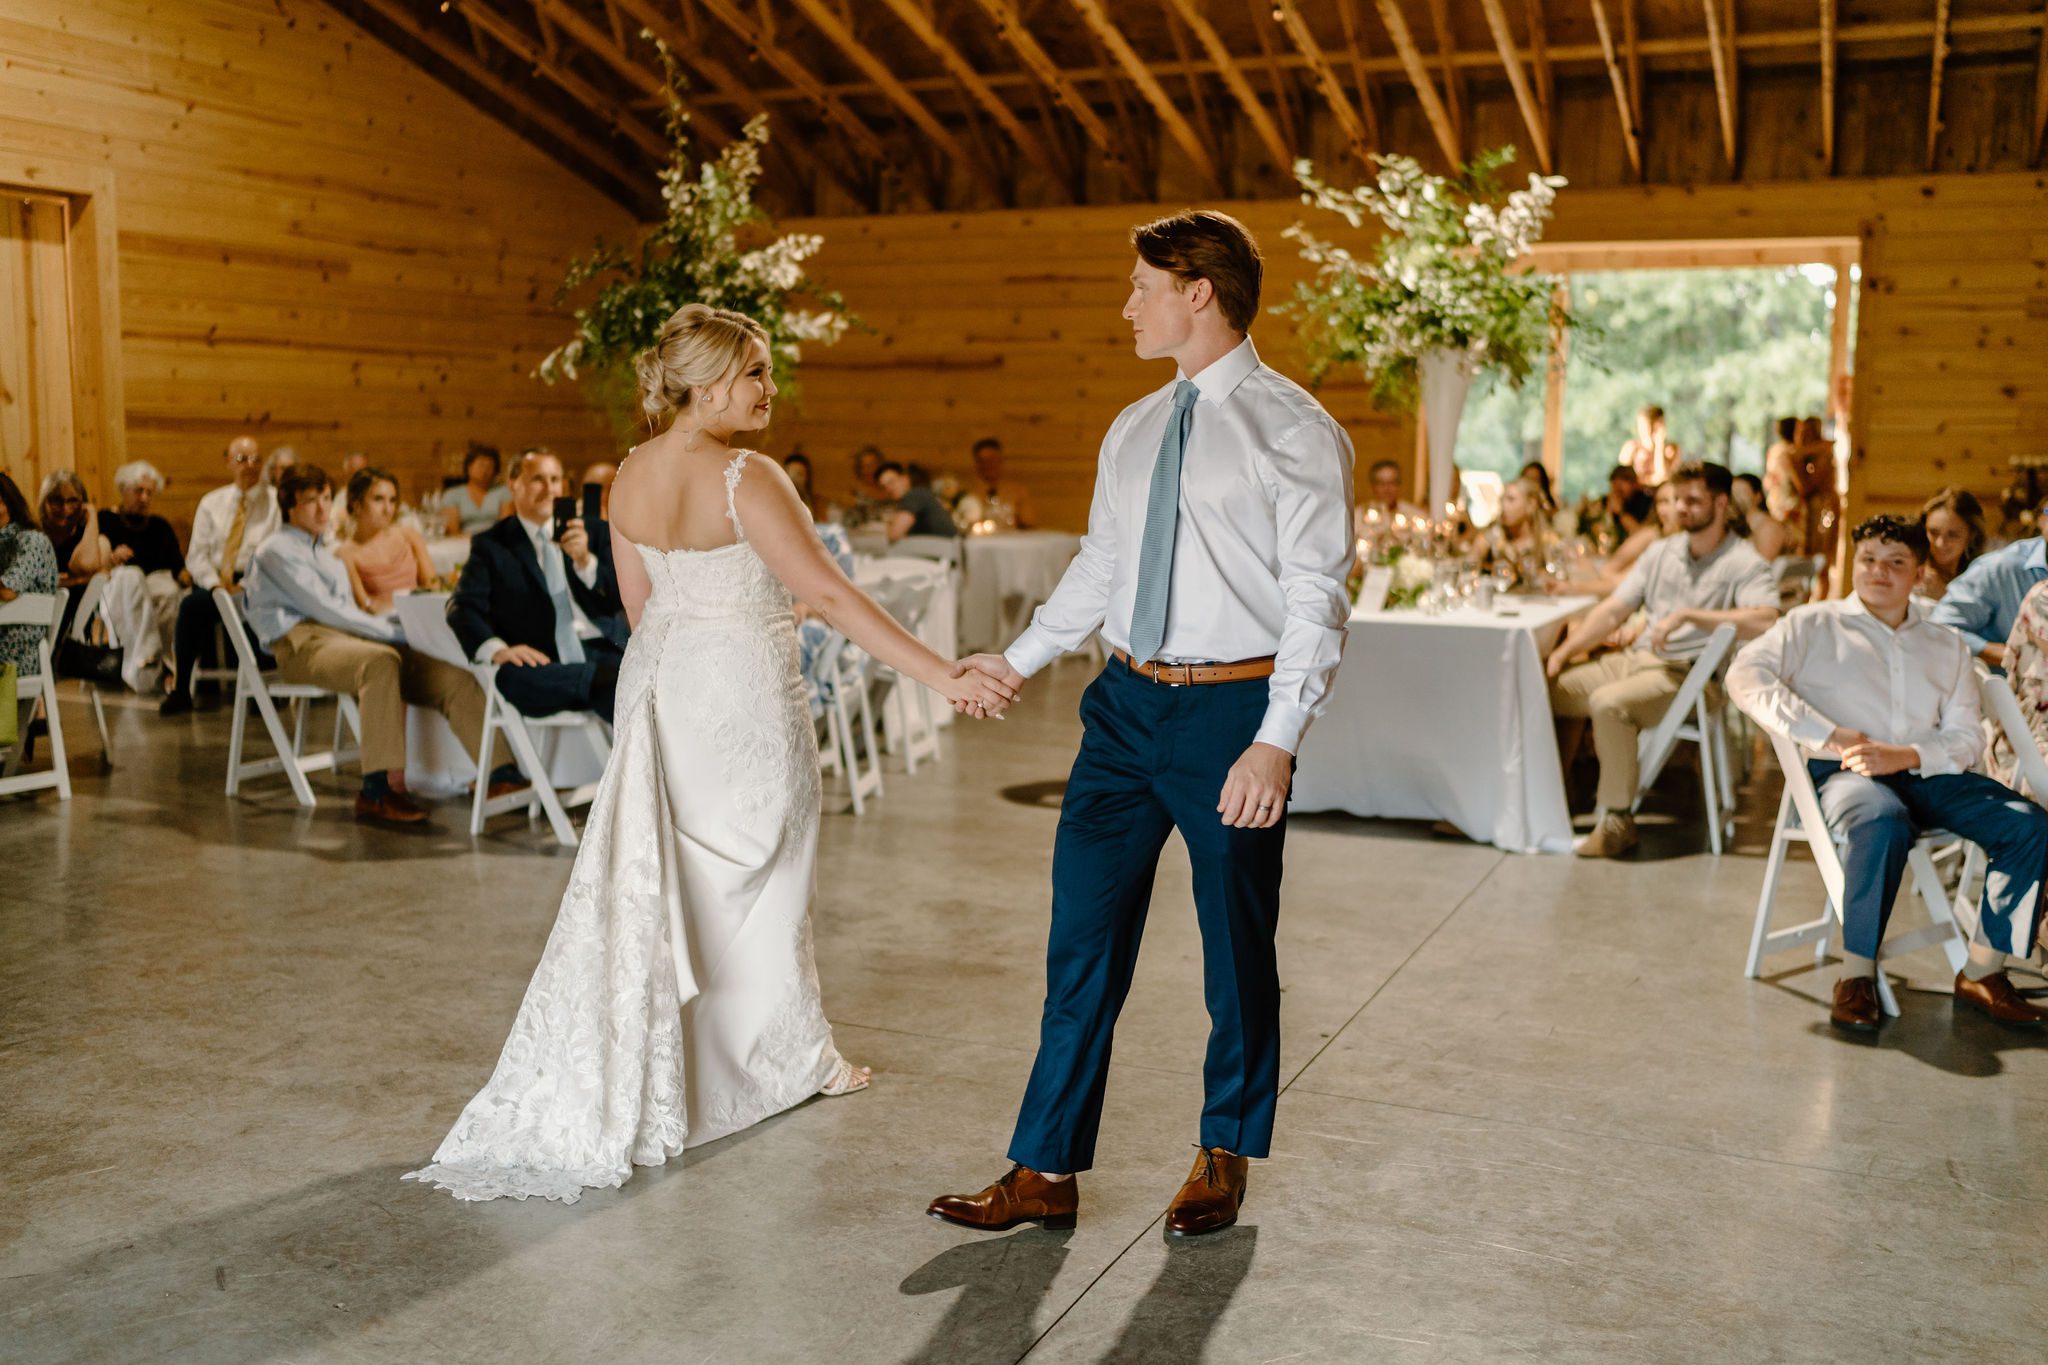 Long Acres Barn venue in Winston-Salem, North Carolina with beautiful decor and forest vibes
